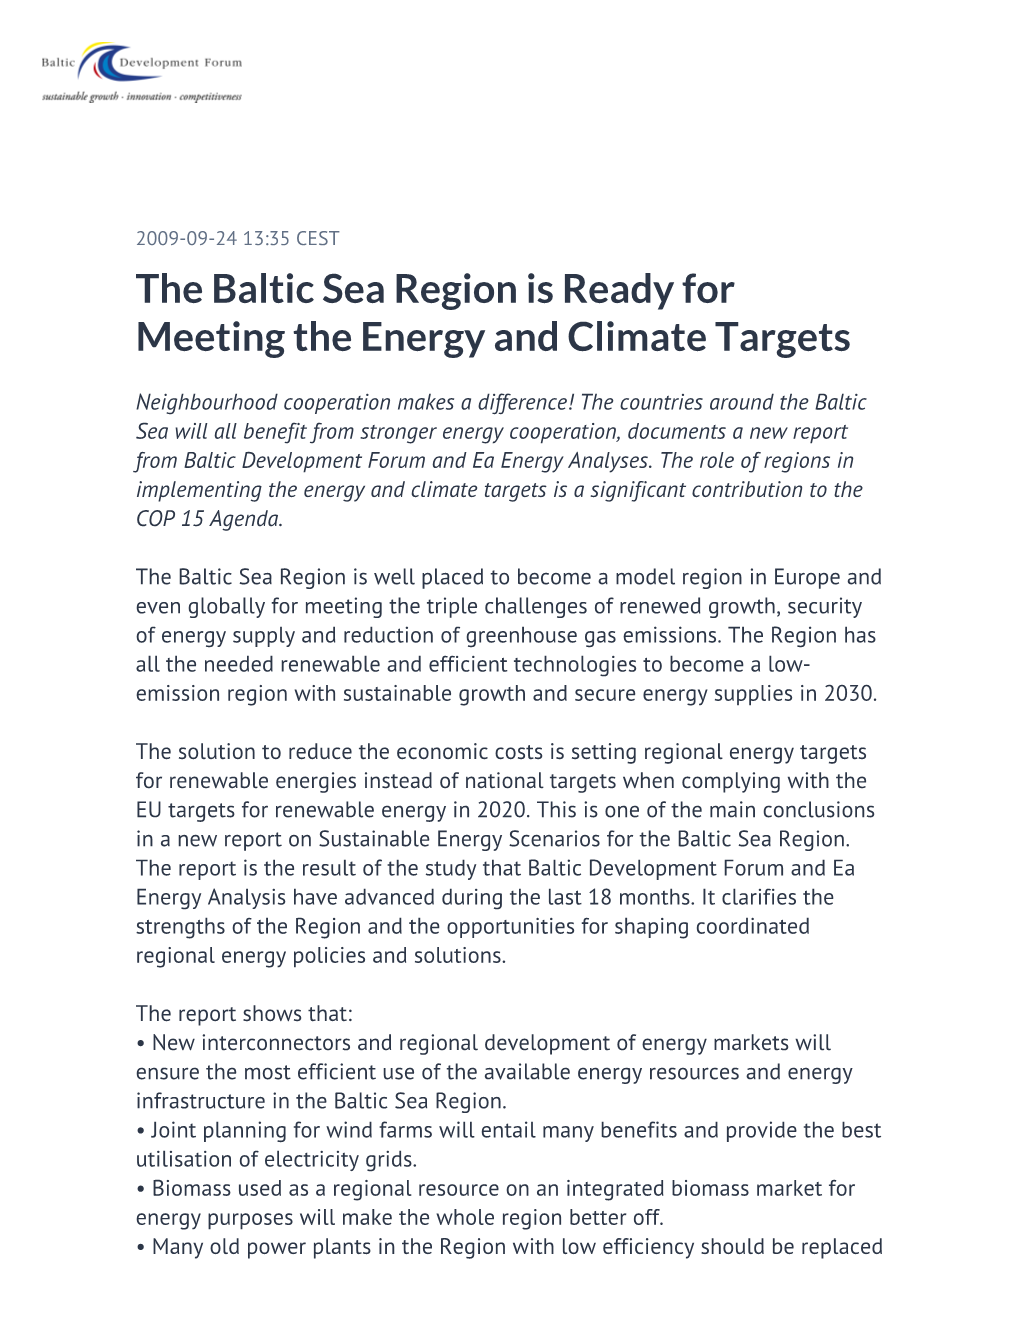 The Baltic Sea Region Is Ready for Meeting the Energy and Climate Targets